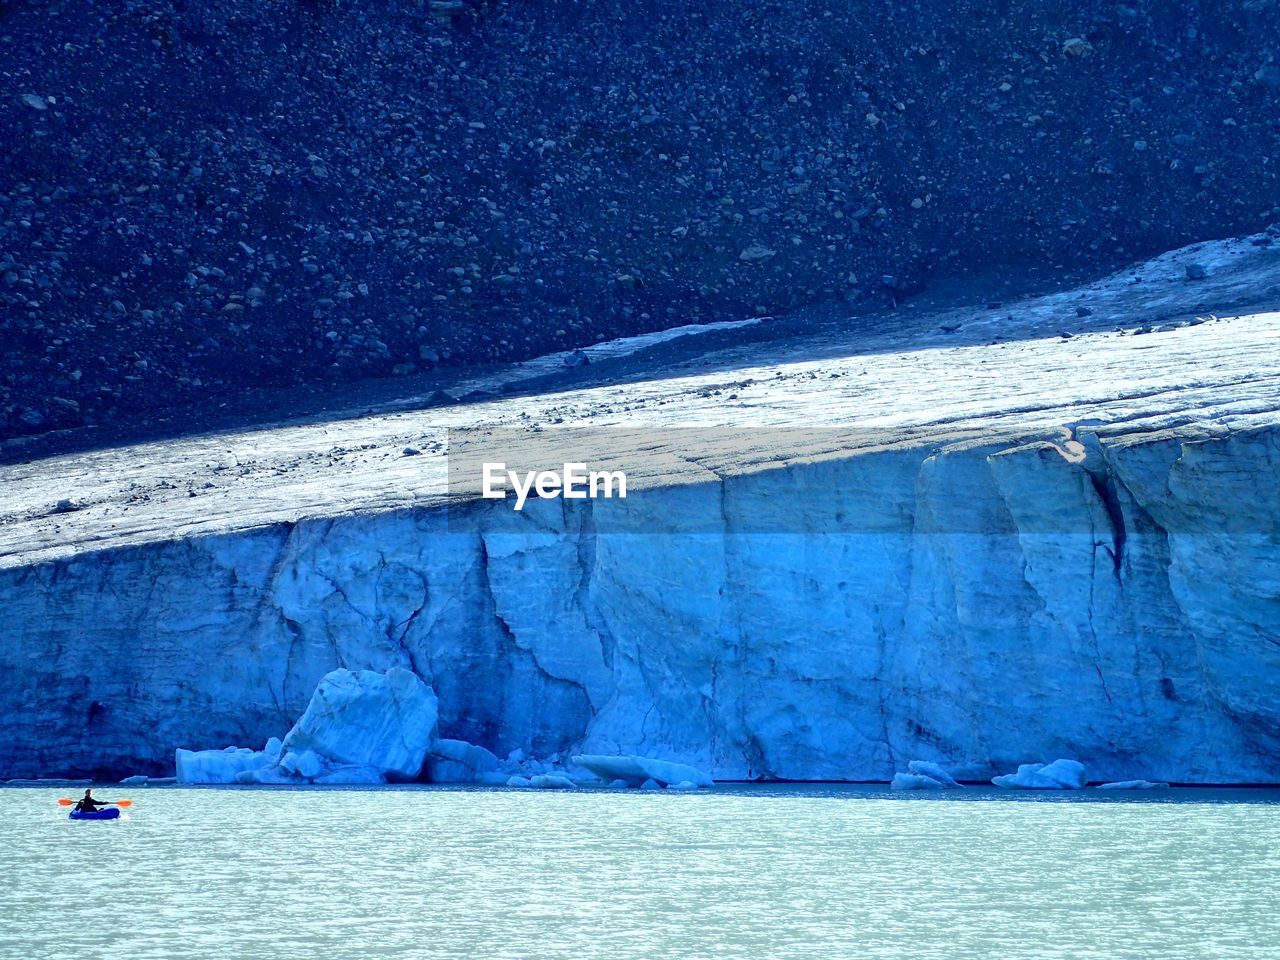 Person kayaking on sea by iceberg